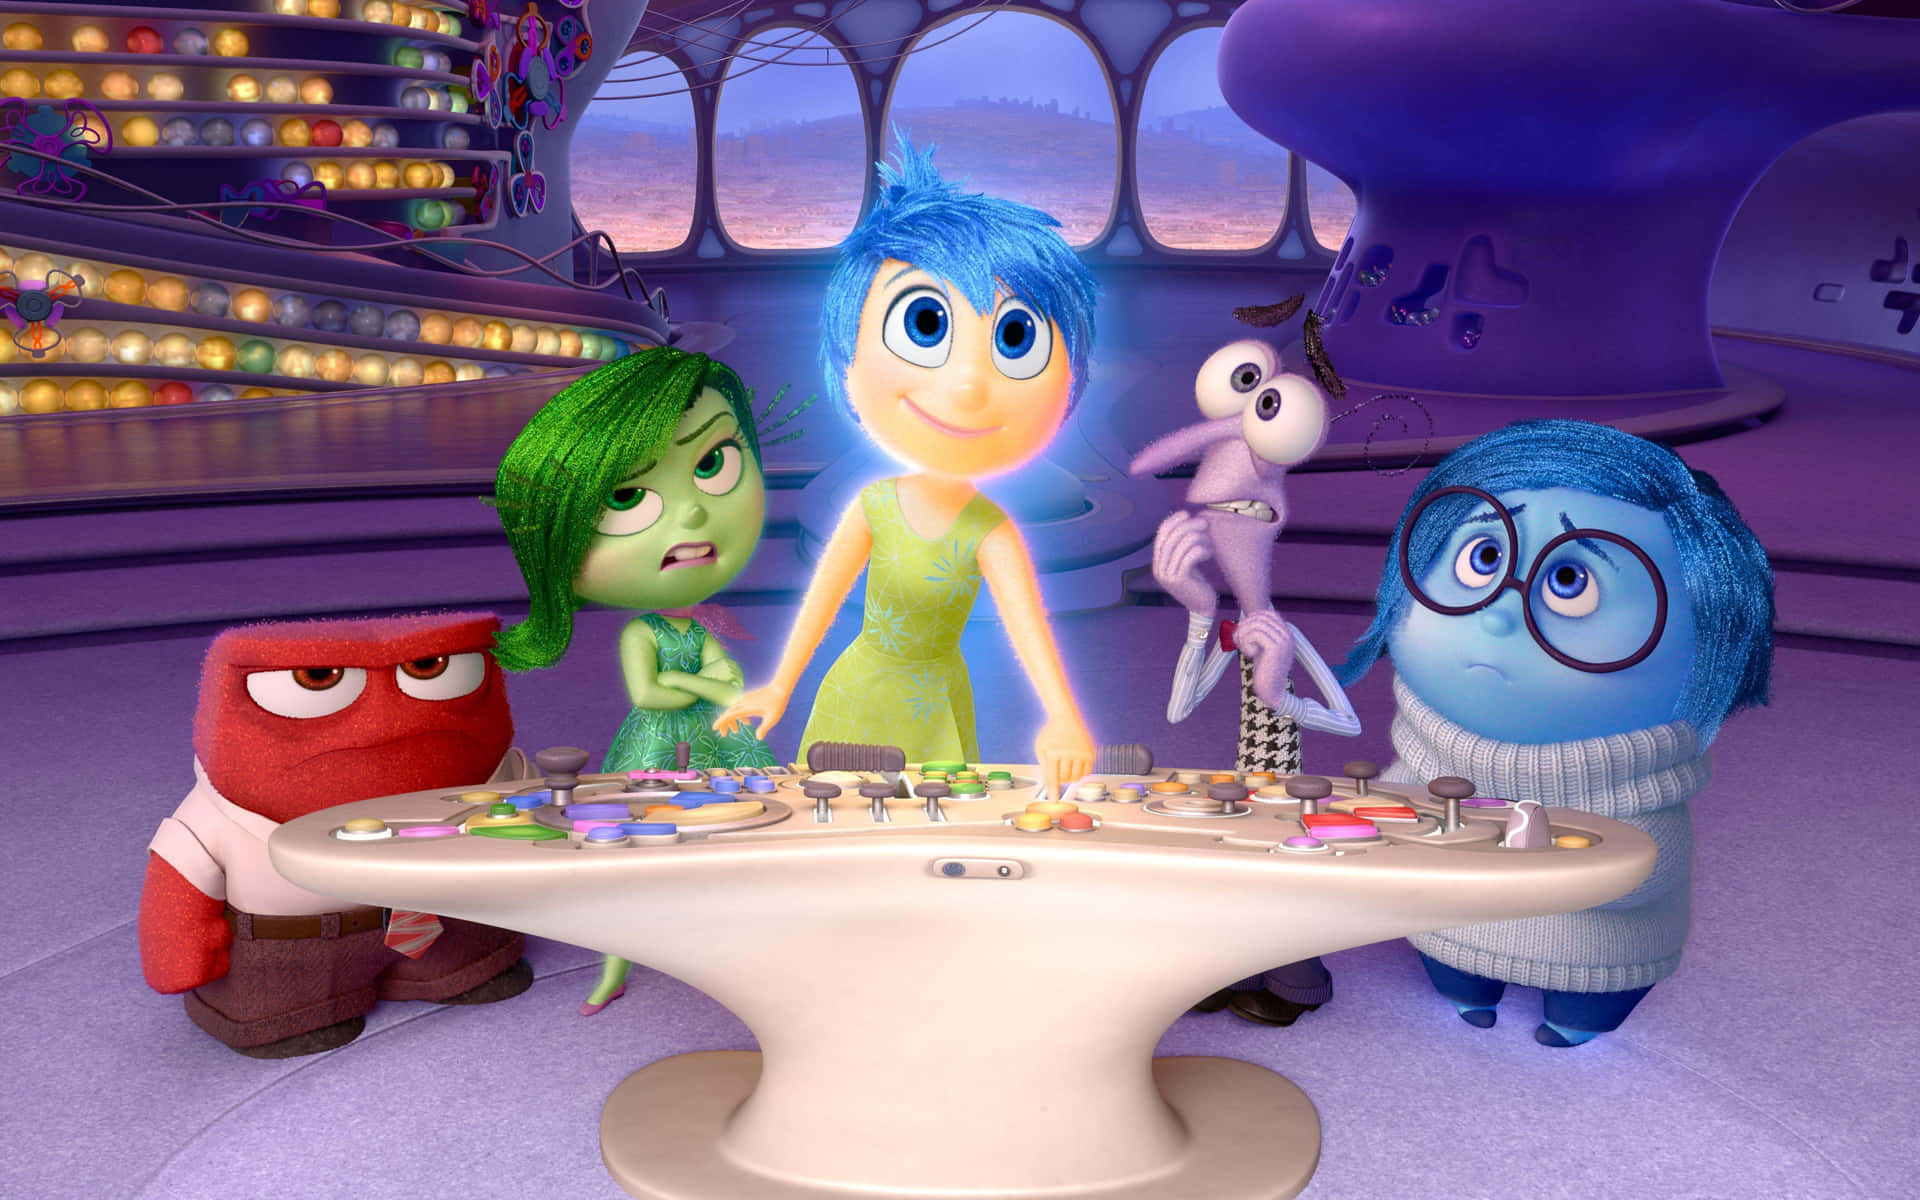 Joy and Sadness enjoy their adventure in the ‘Headquarters’ of Inside Out.